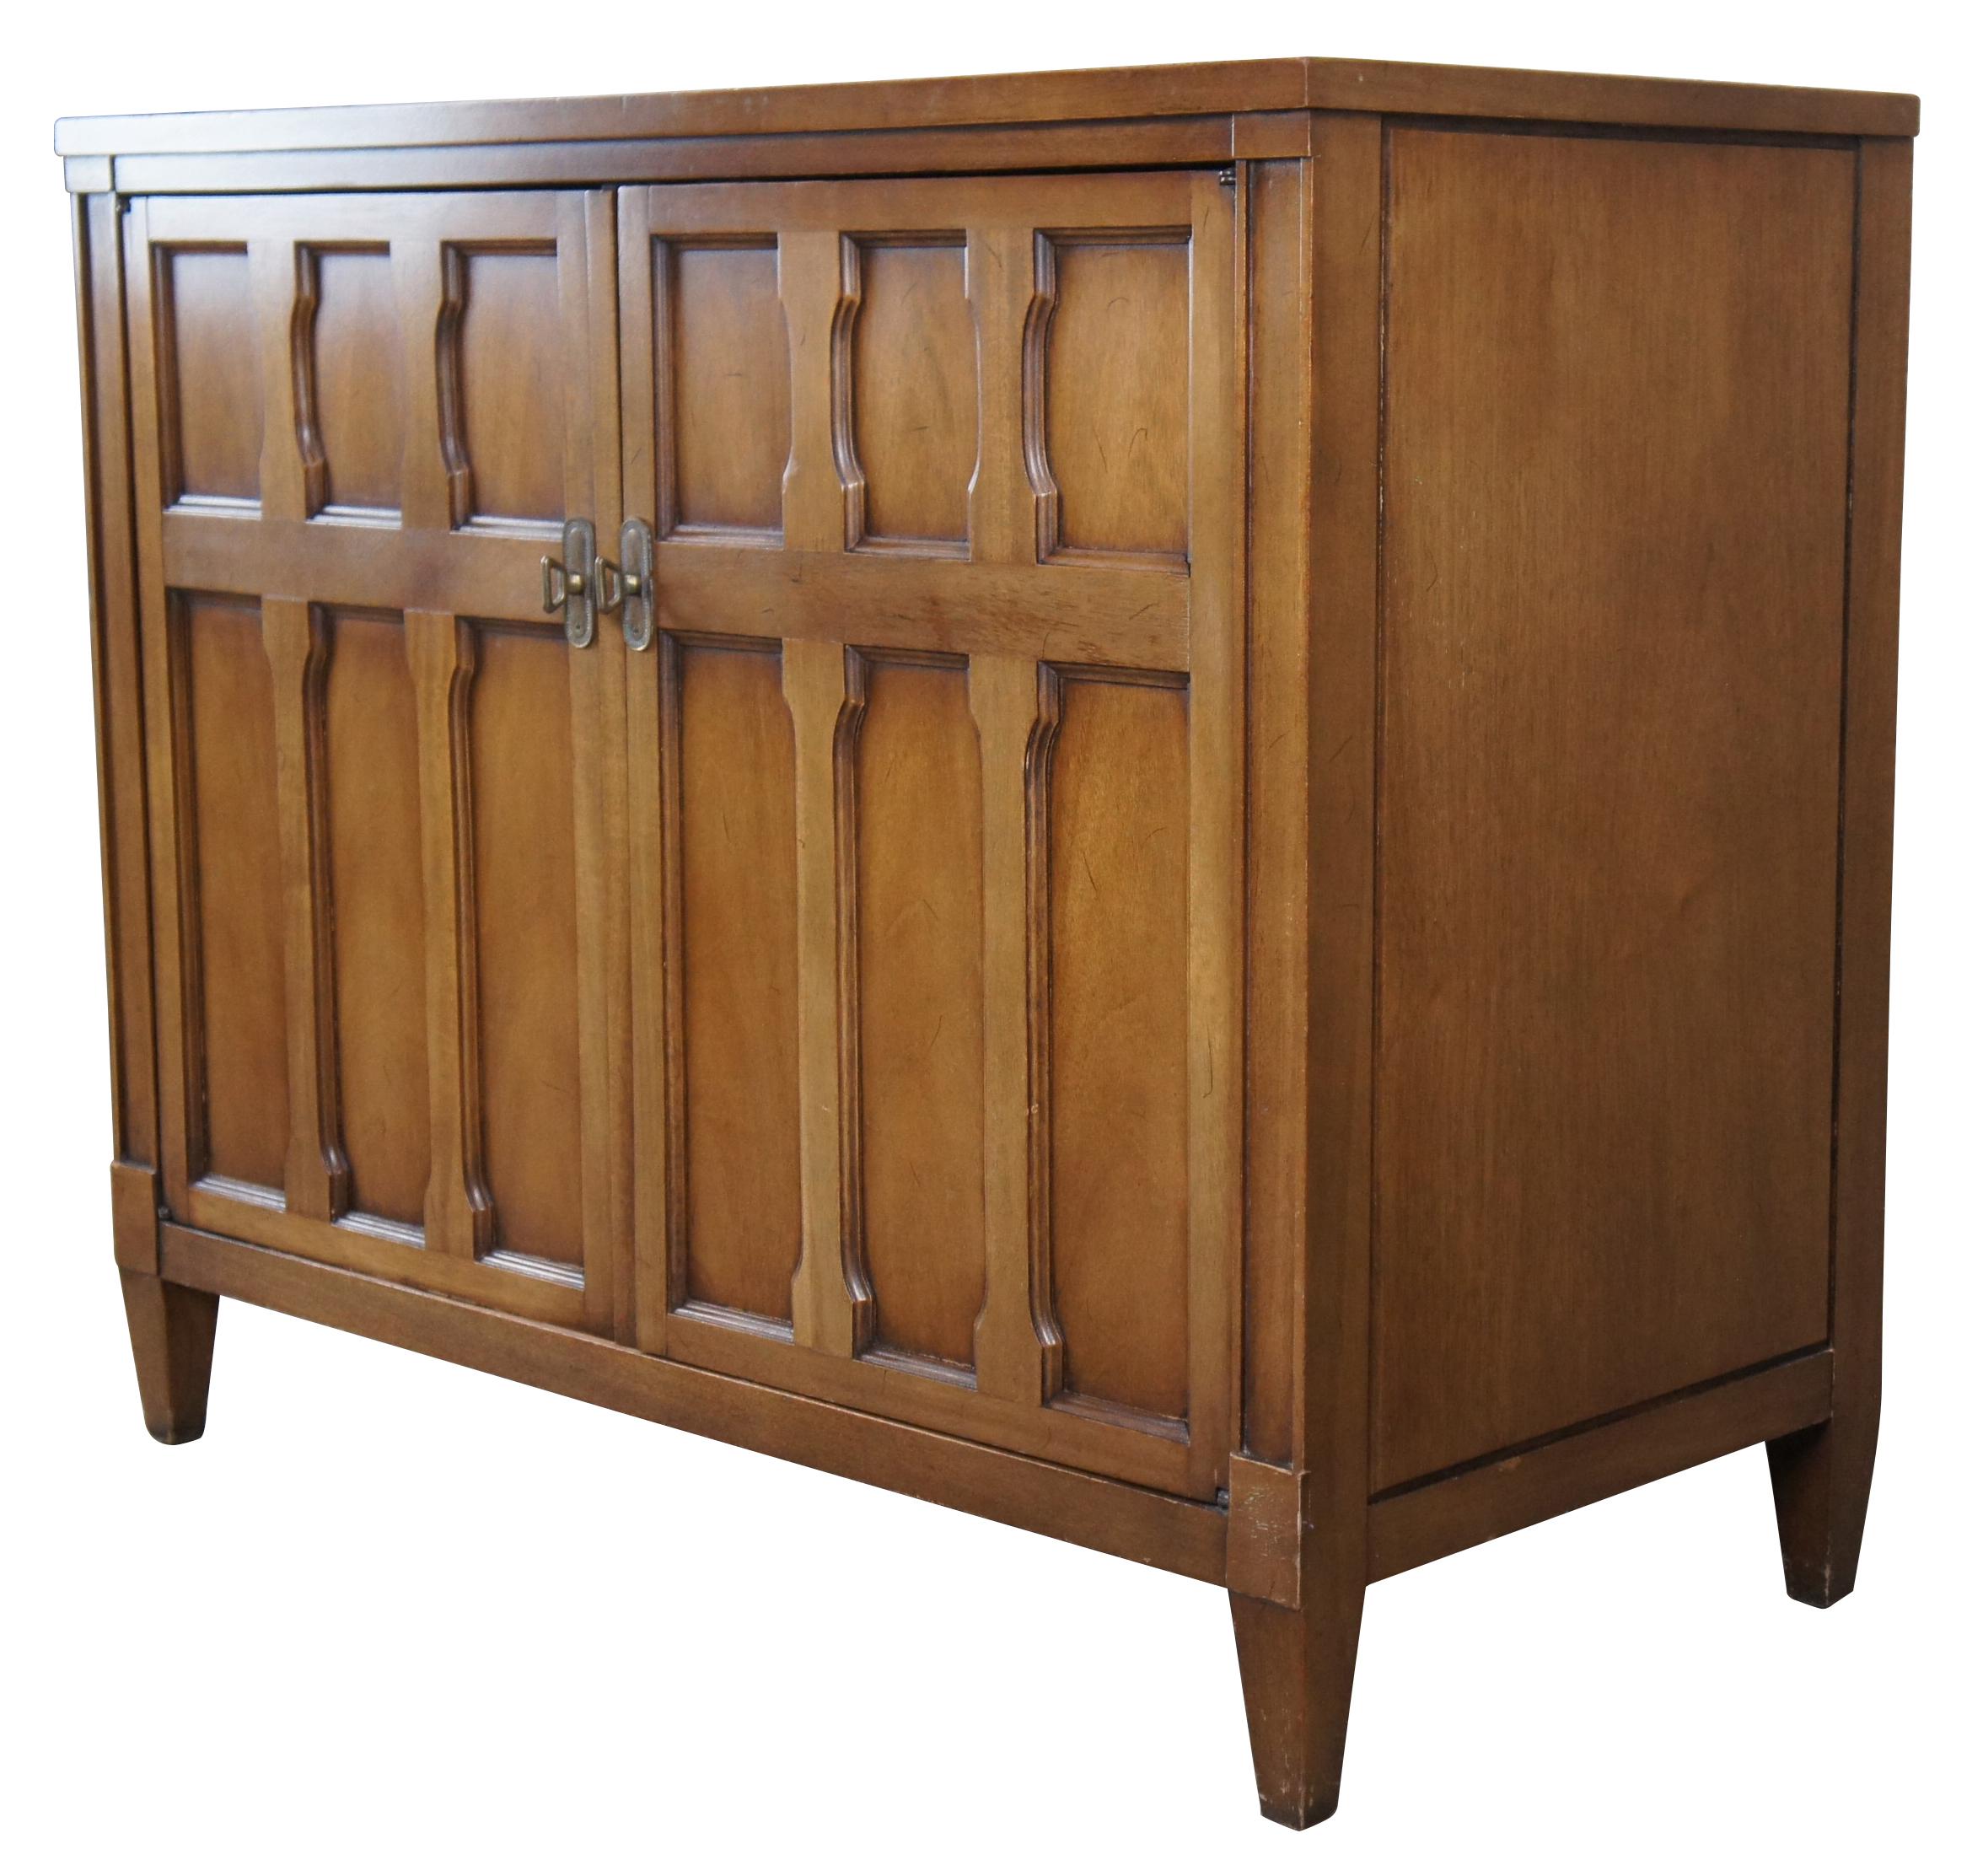 Vintage Drexel Triune buffet or server. Made of mahogany featuring paneled cabinet doors that open to a silverware drawer and two storage shelves. circa 1967. 585-407.